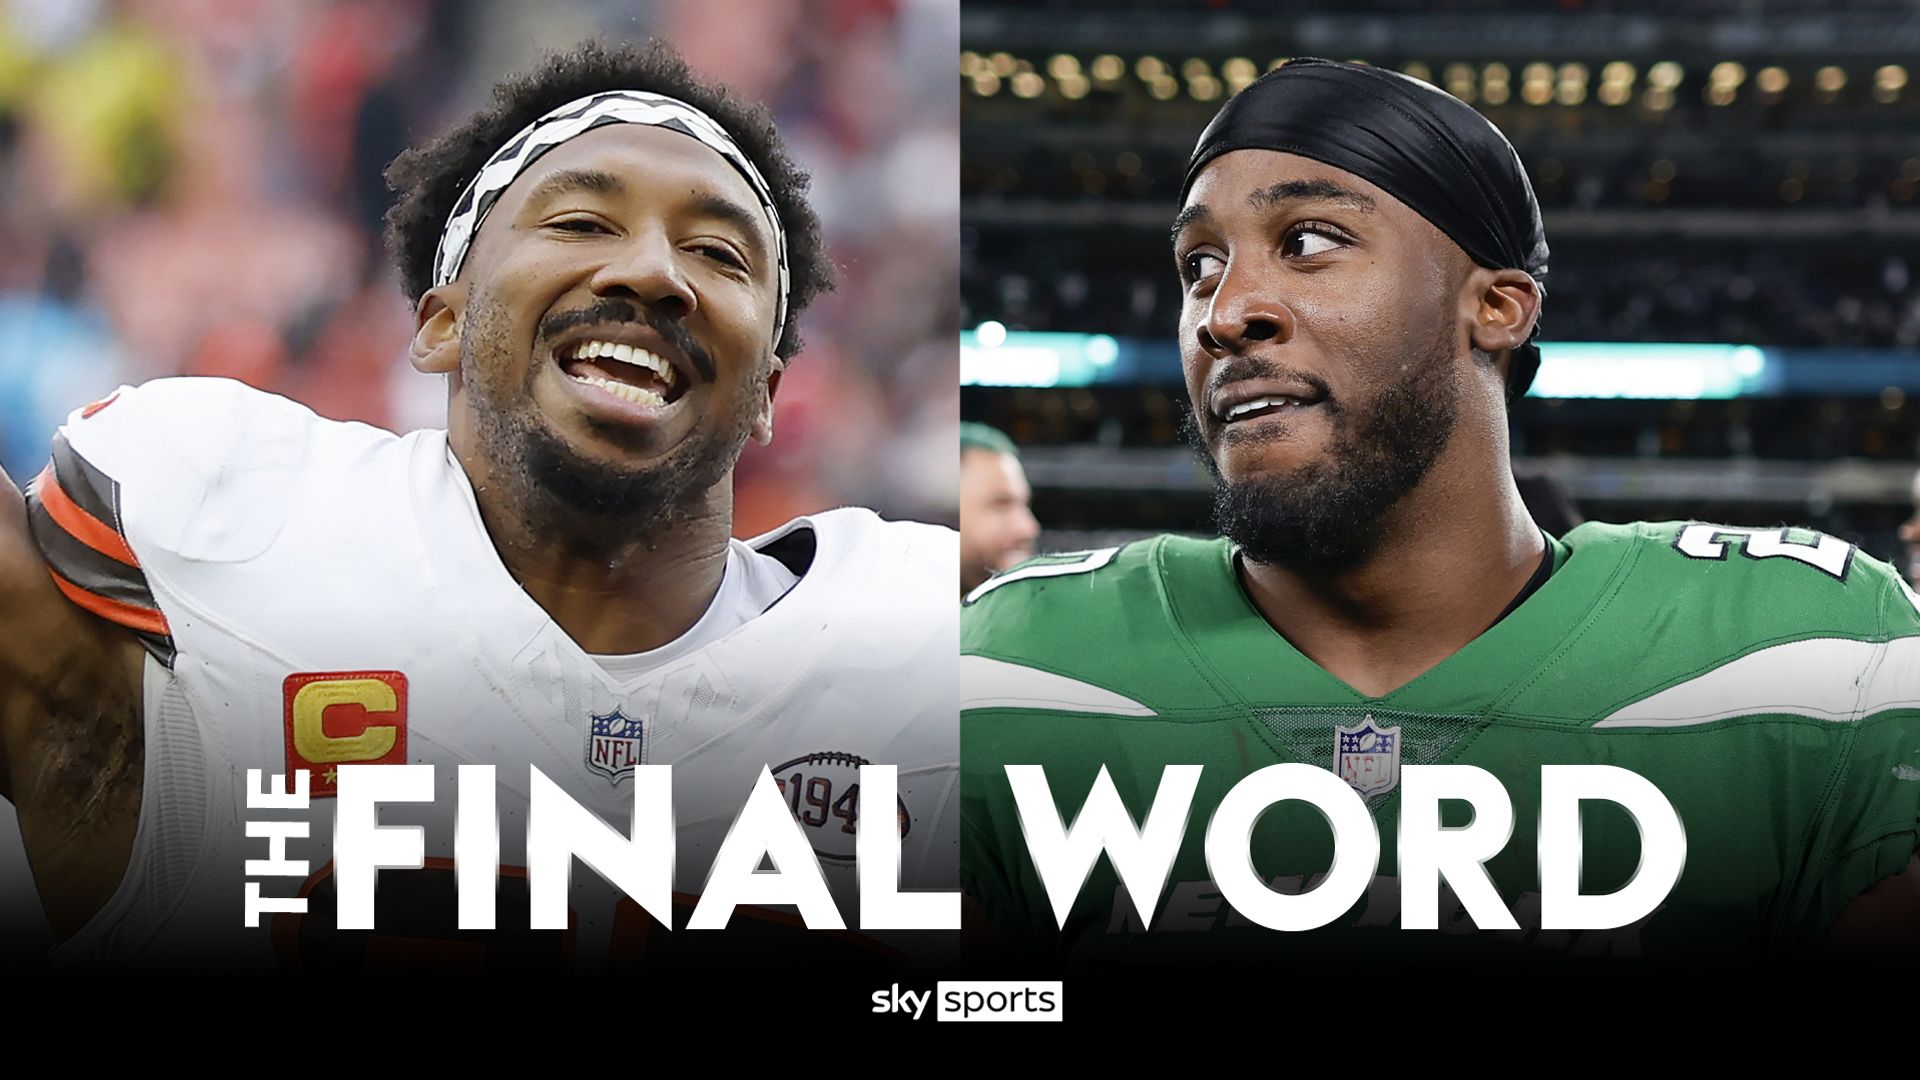 The Final Word: The NFL's perfect records come to an end